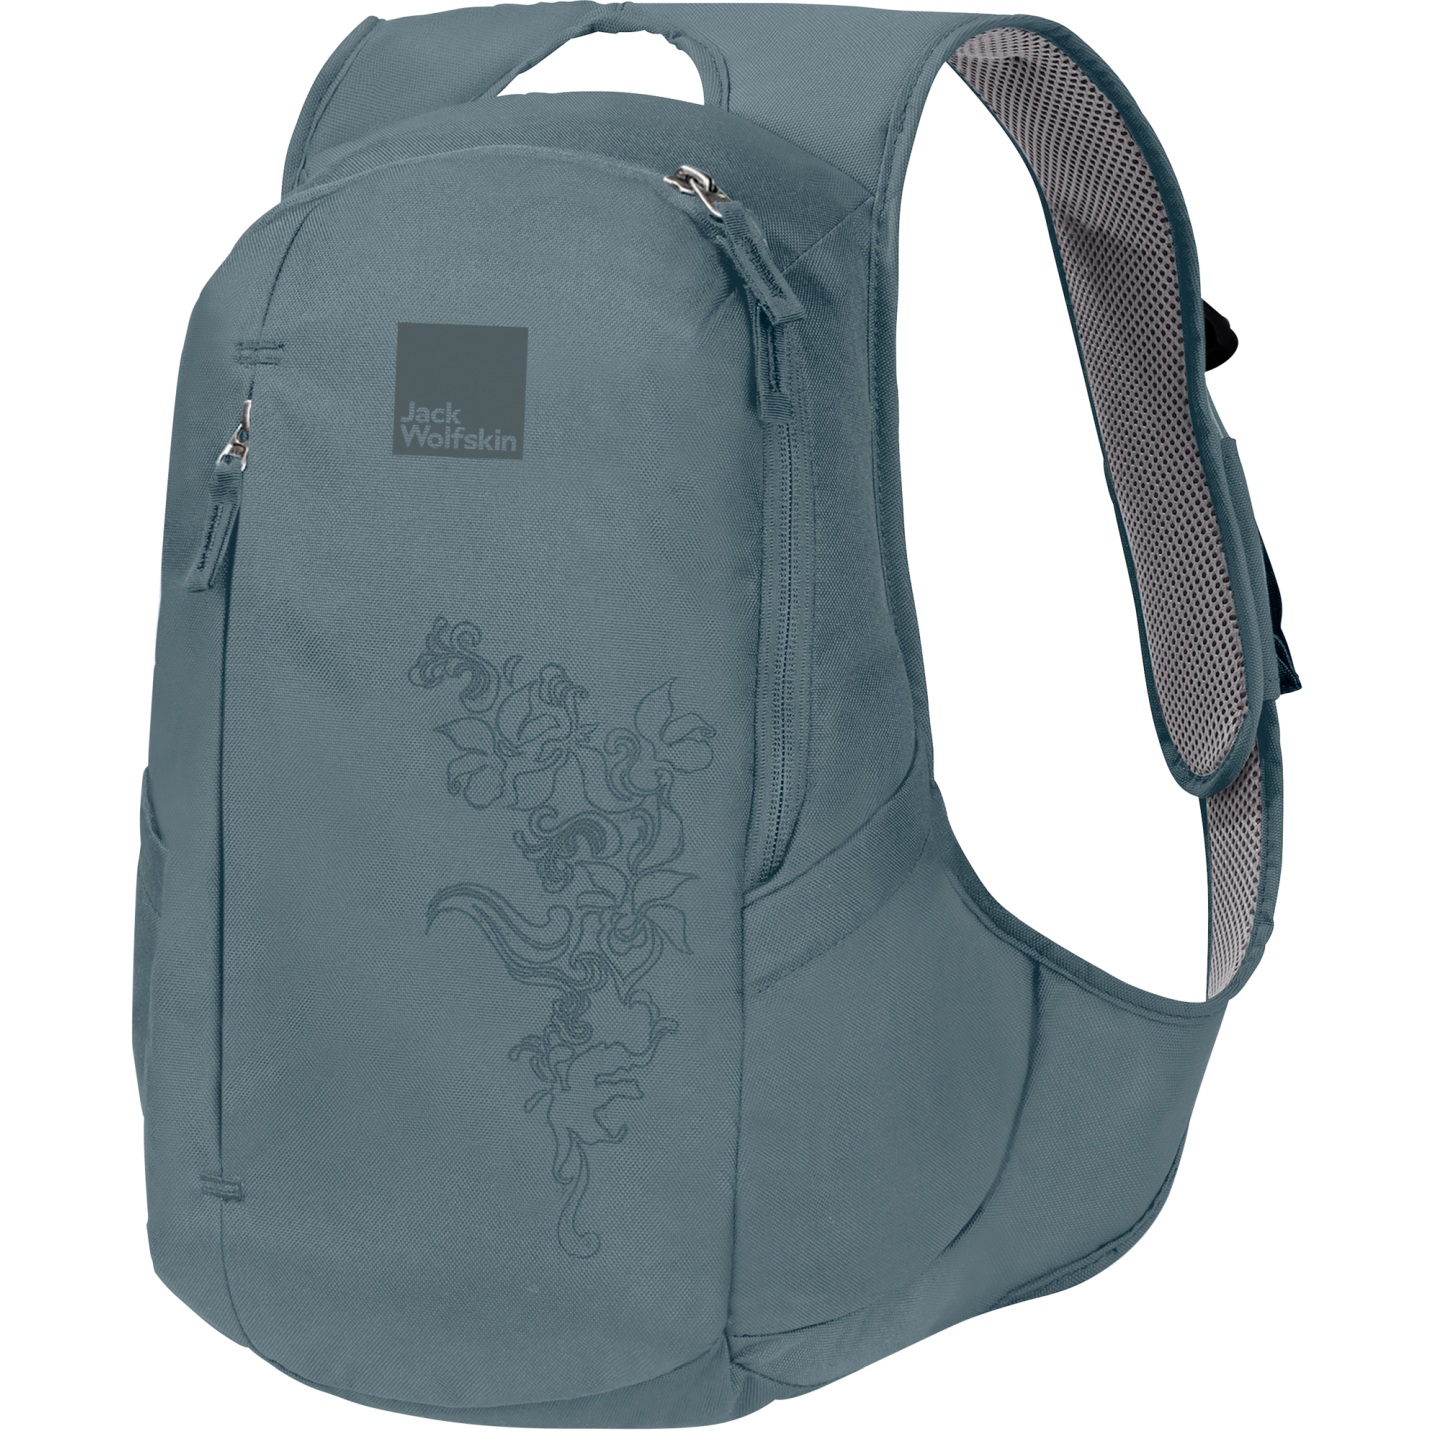 Picture of Jack Wolfskin Ancona Backpack Women - teal grey